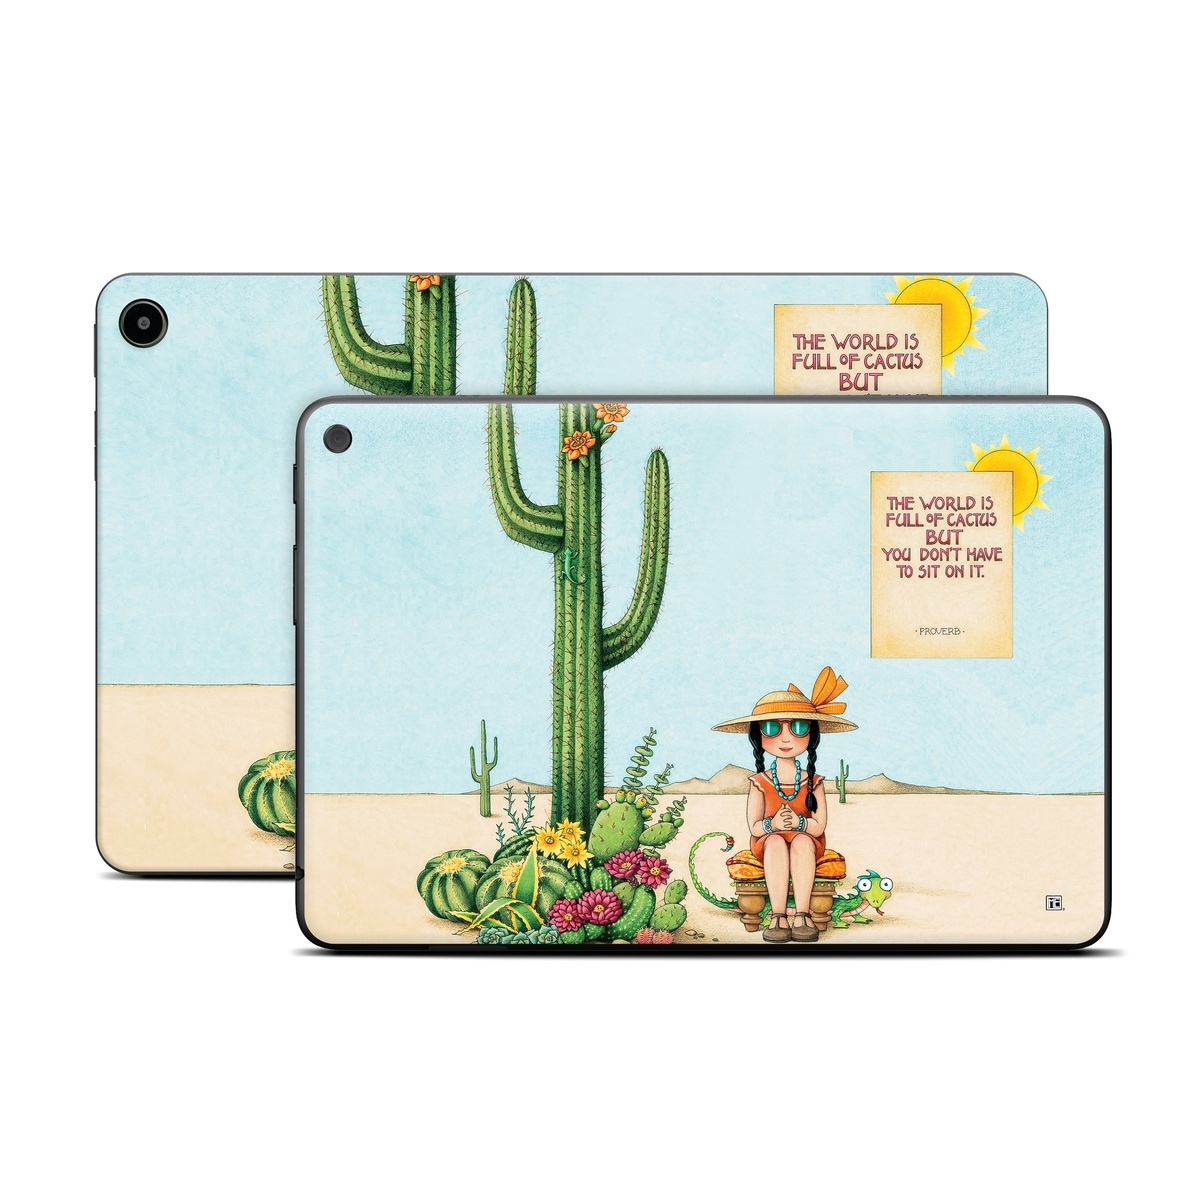 Amazon Fire Tablet Series Skin Skin design of Cartoon, Cactus, Illustration, Animated cartoon, Plant, Vegetable, Fictional character, Art, with green, yellow, pink, orange, brown colors